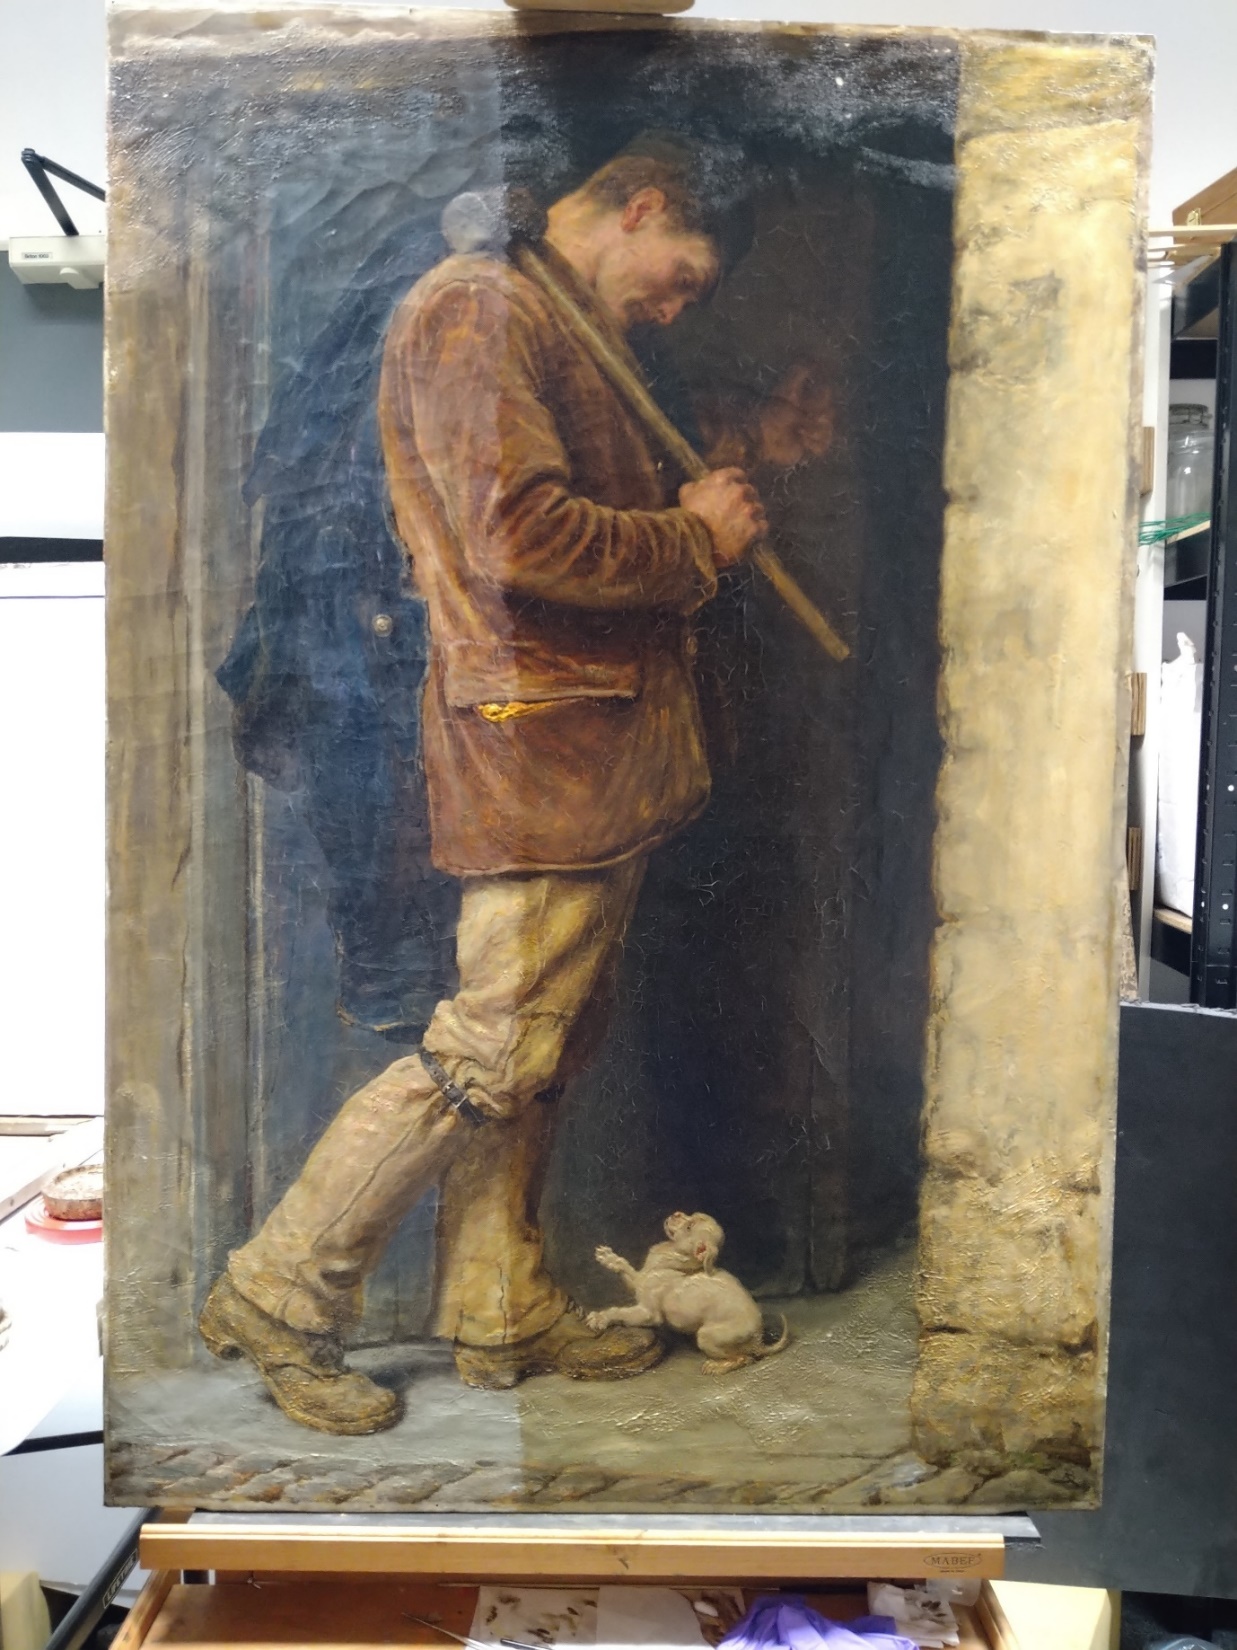 'The Welcome' at the conservator's studio showing the progress of surface cleaning